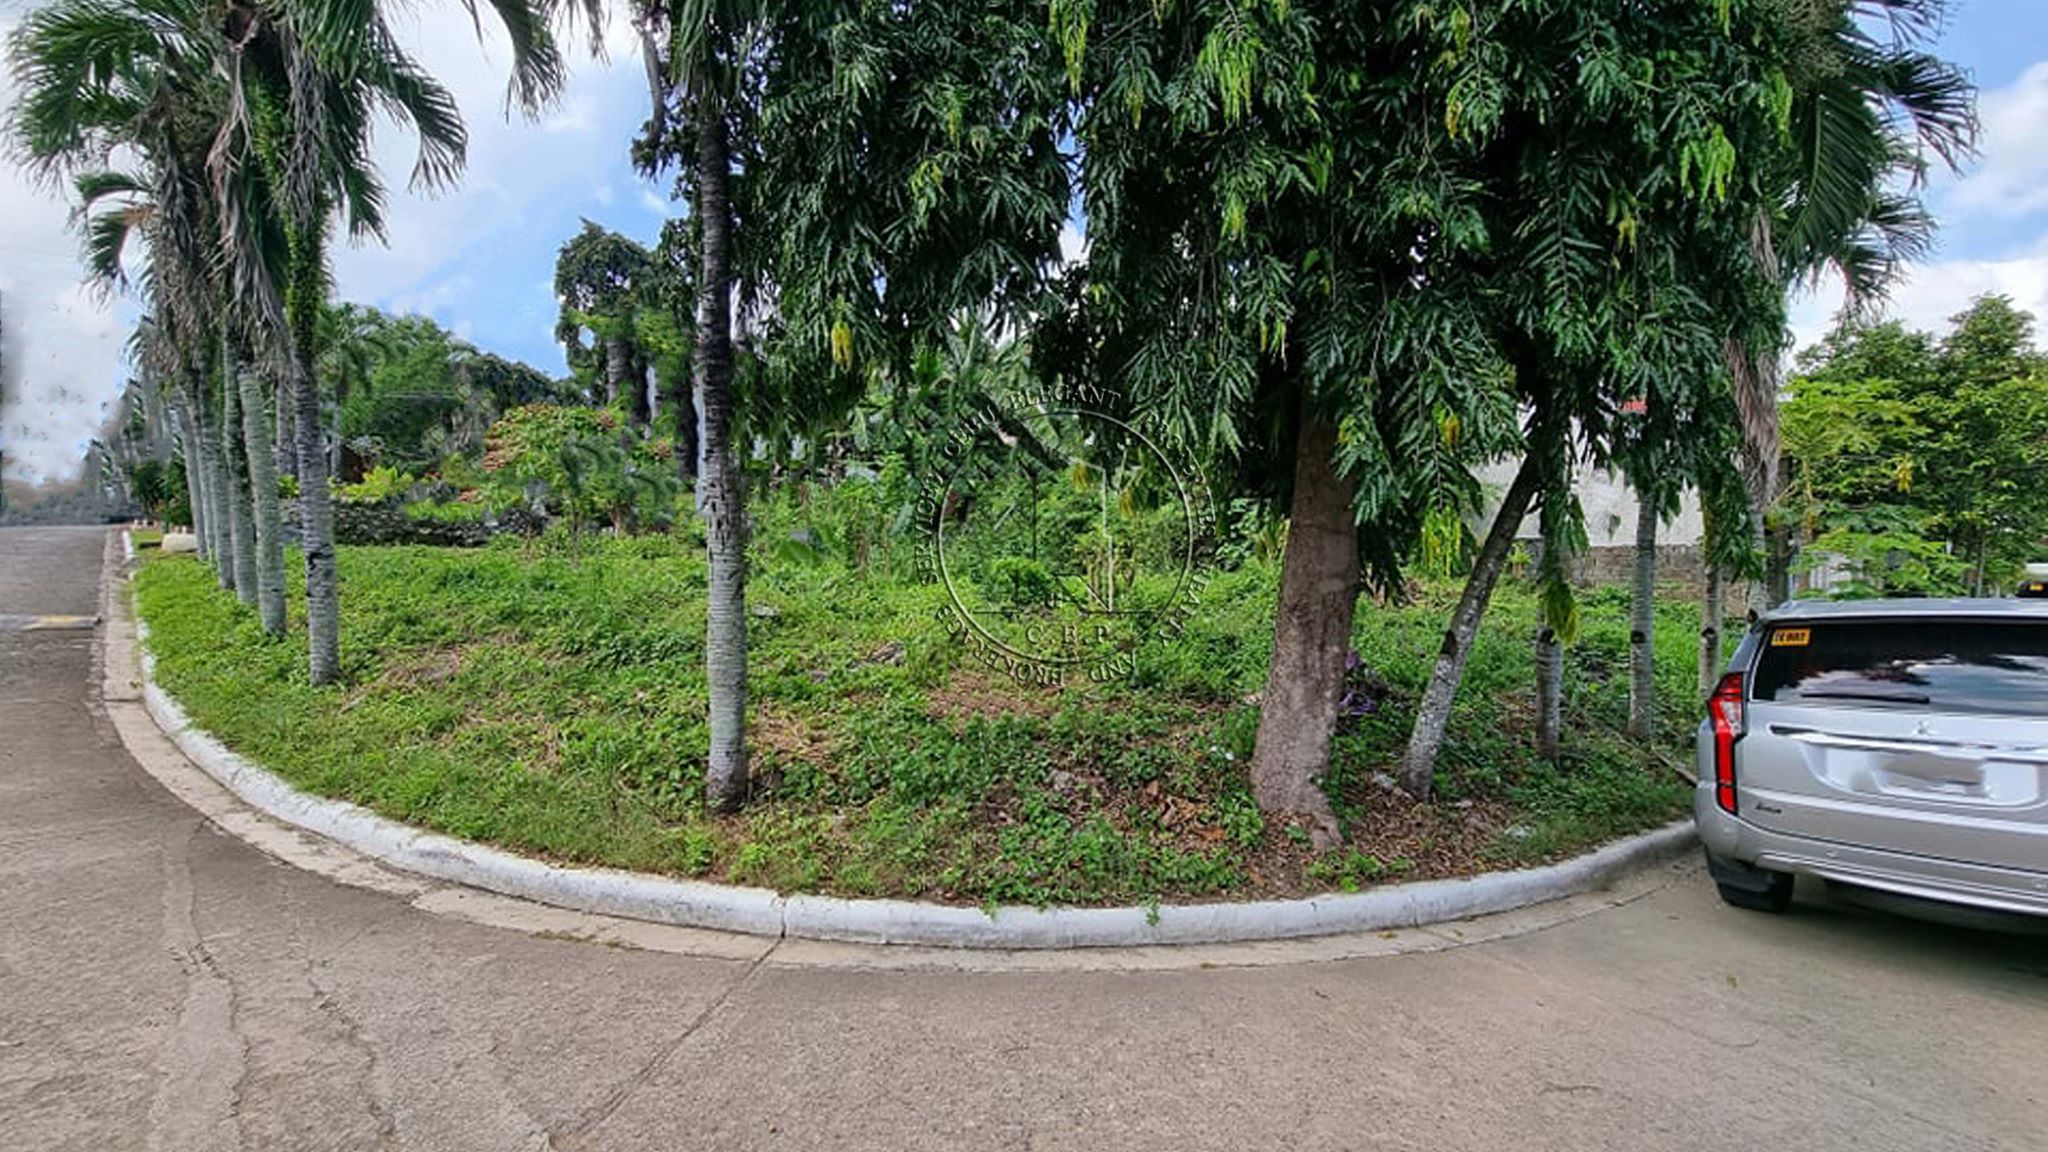 Residential Lot For Sale Inside a Gated Community